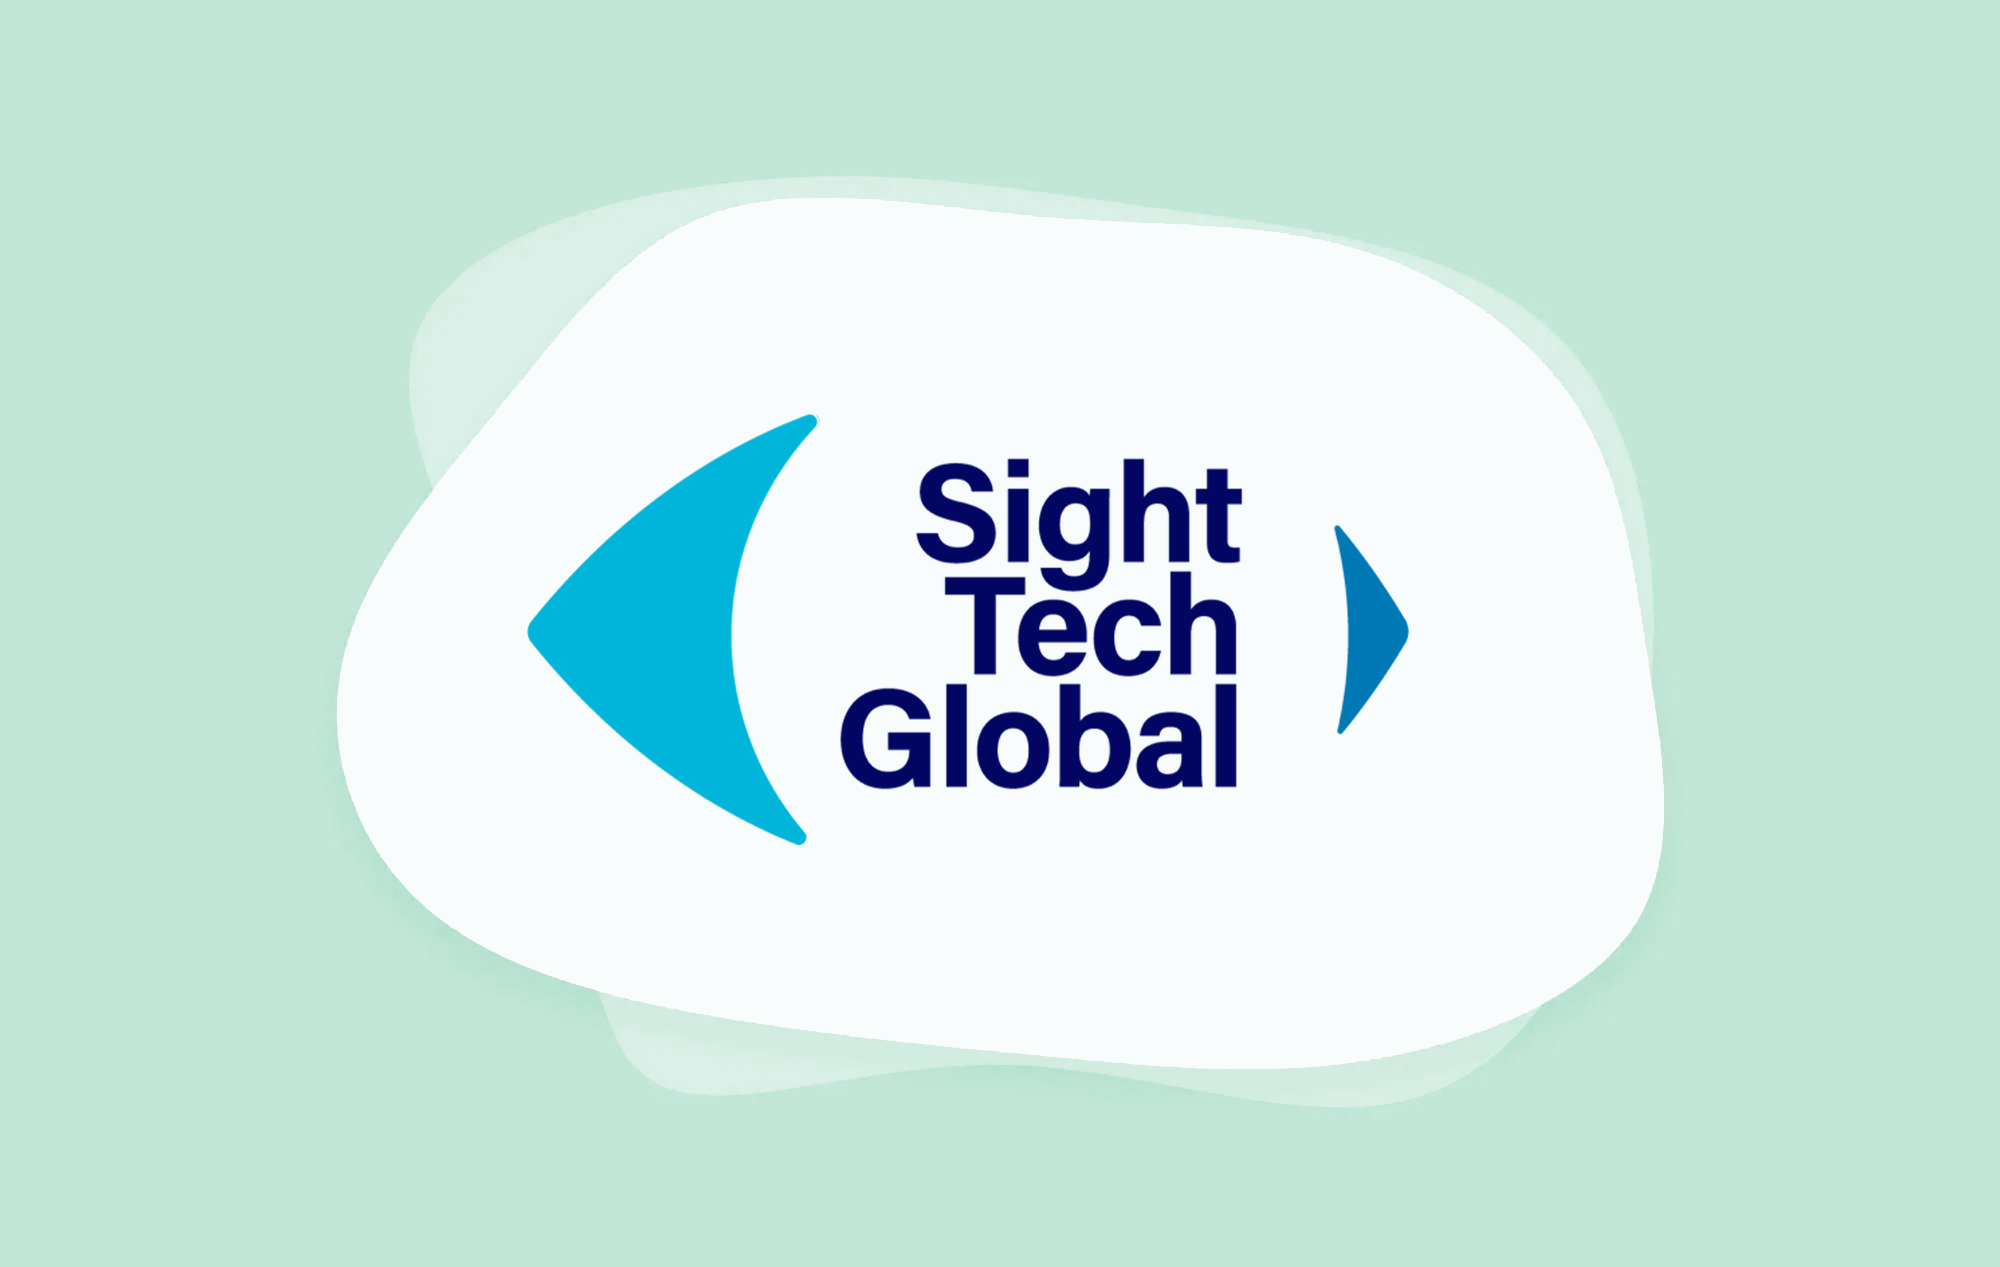 Navy and teal Sight Tech Global logo on a light green background.